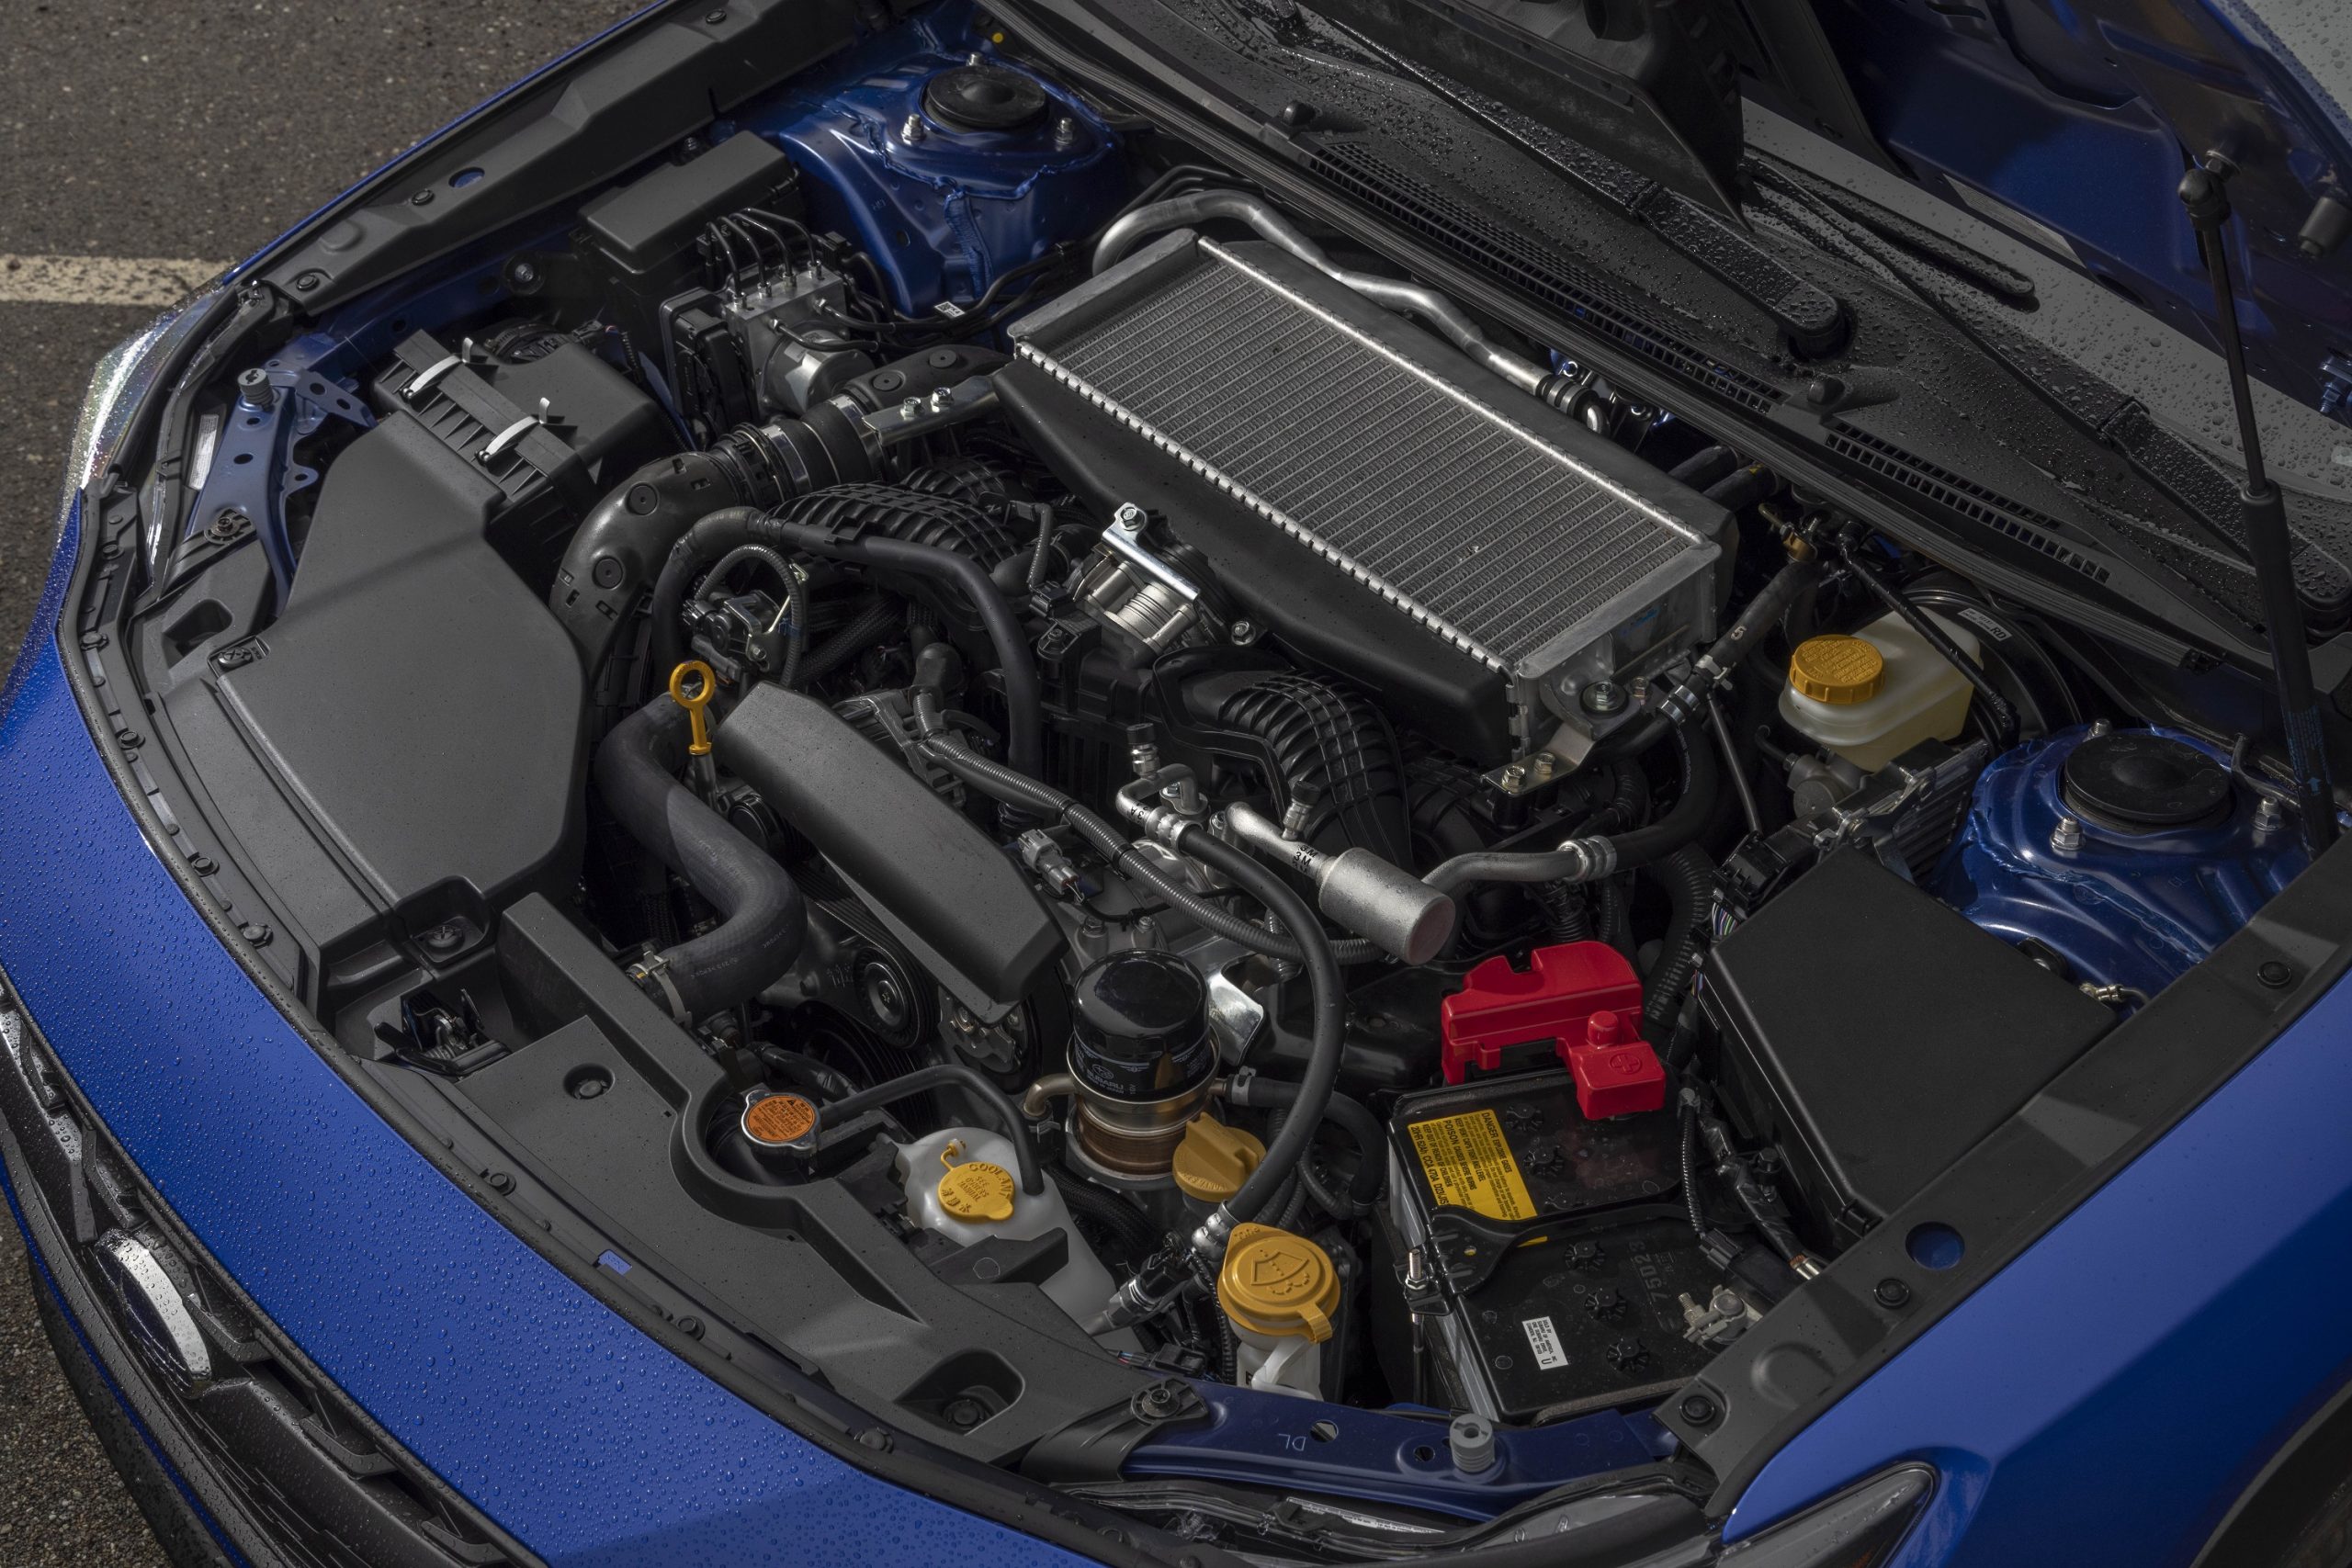 The 2.4l engine found in both the Subaru WRX and the Subaru Outback